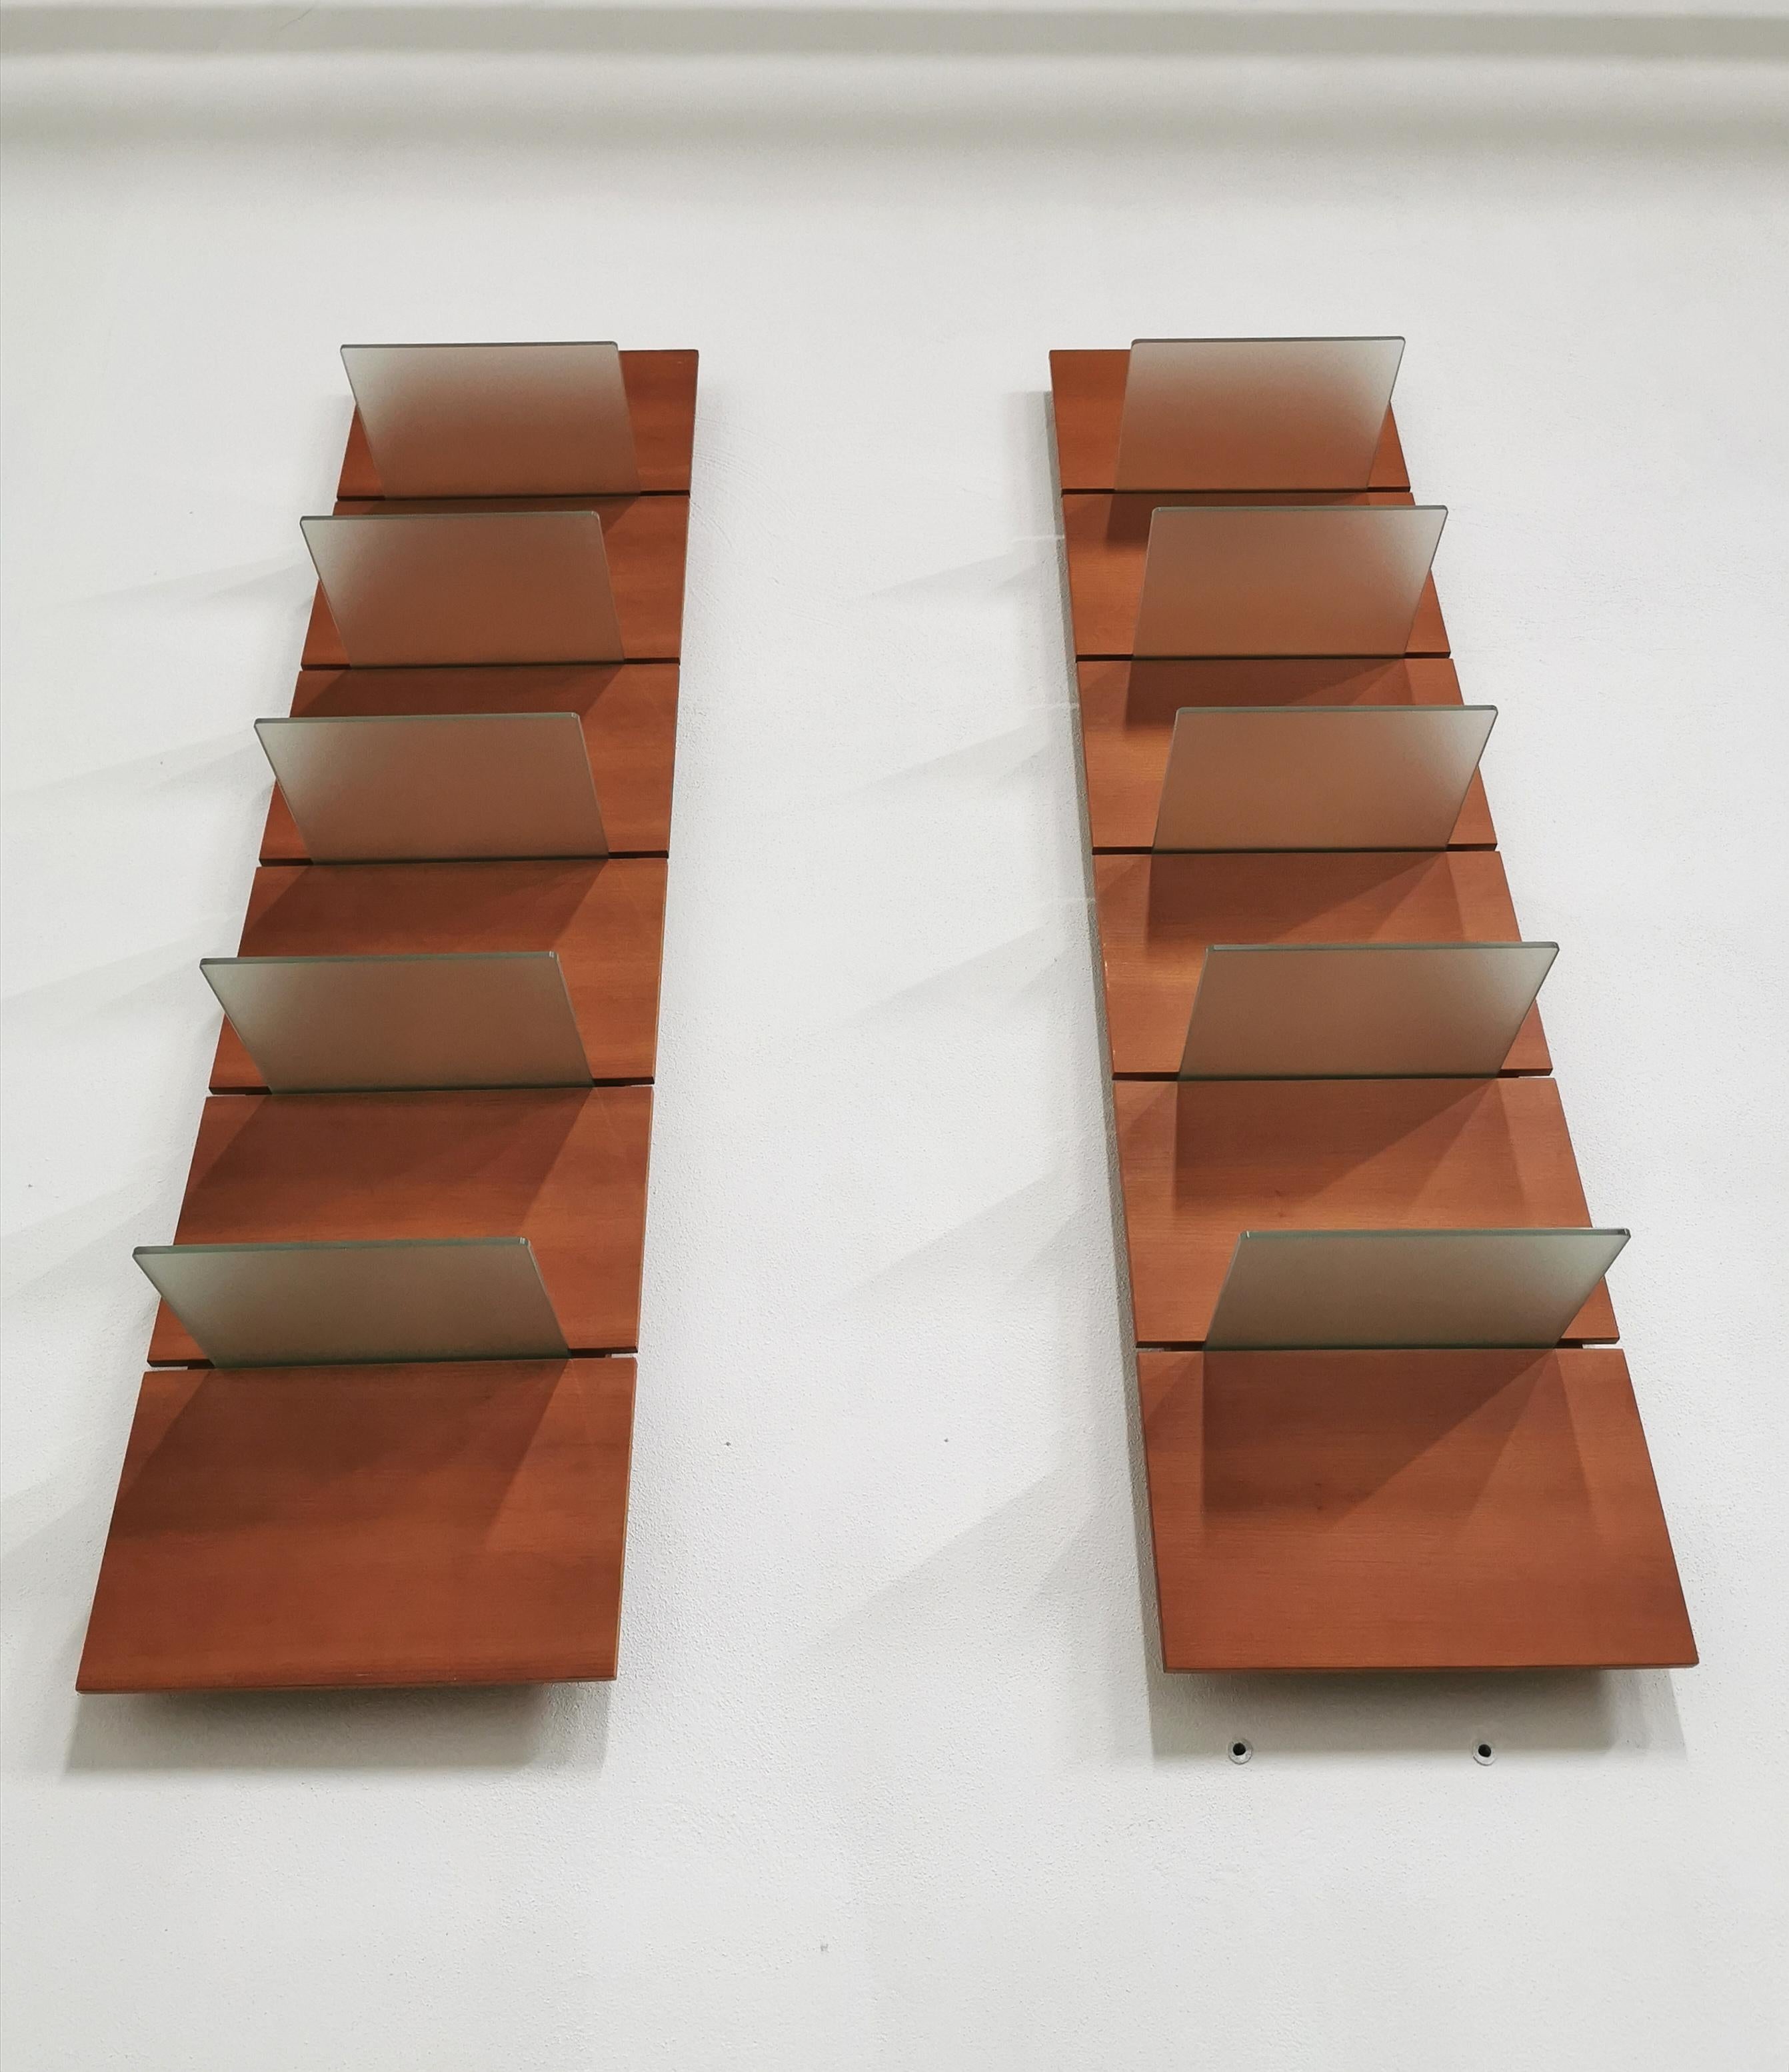 Particular and elegant set of 2 wall shelves produced by the Italian company Calligaris. Cherrywood structure with interlocking removable glass. The glasses have a satin part. Italian production of the 1990s.